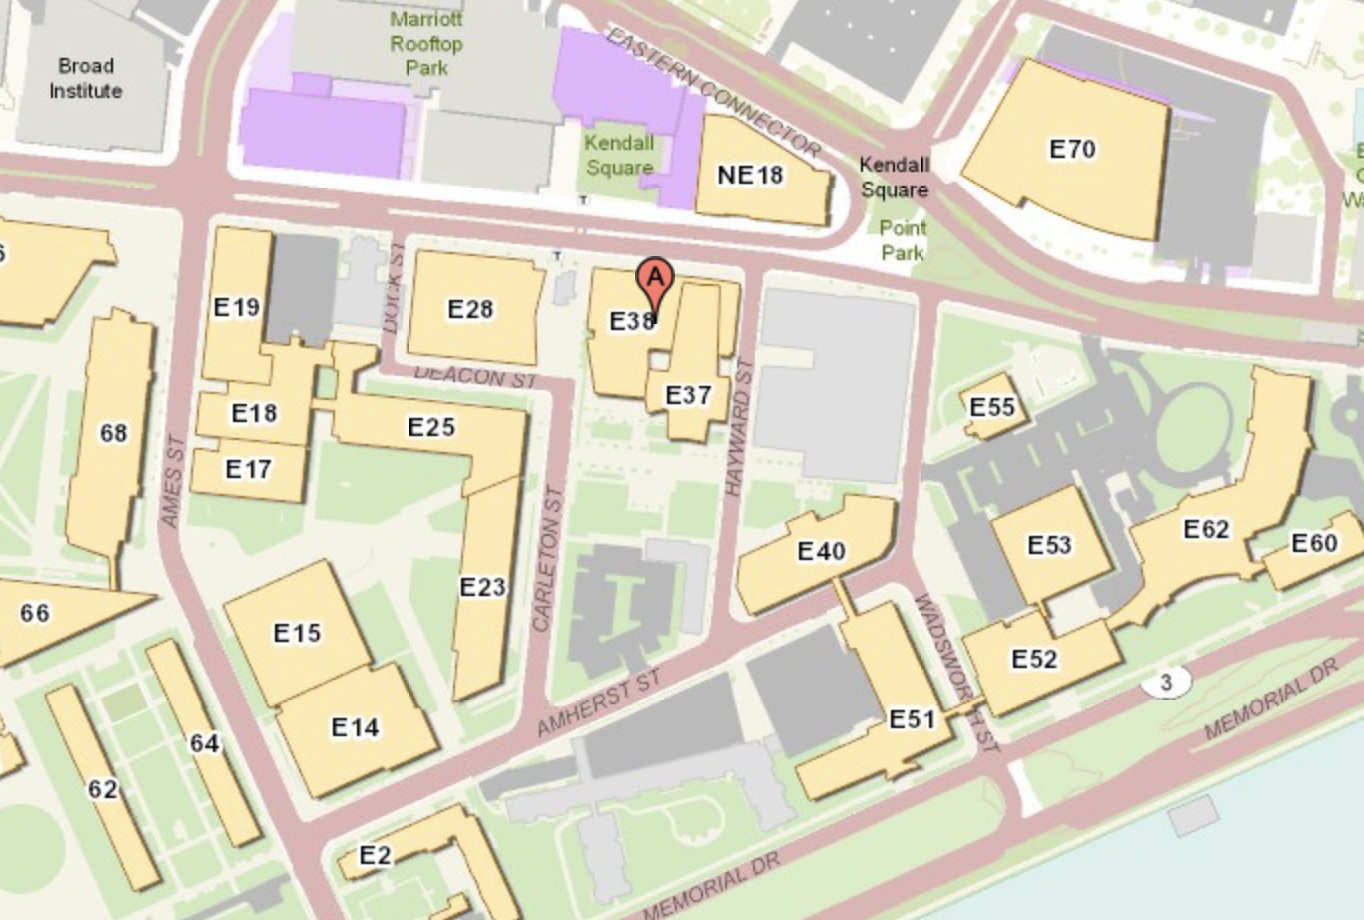 MIT of MIT's campus with a red pin in Building E38